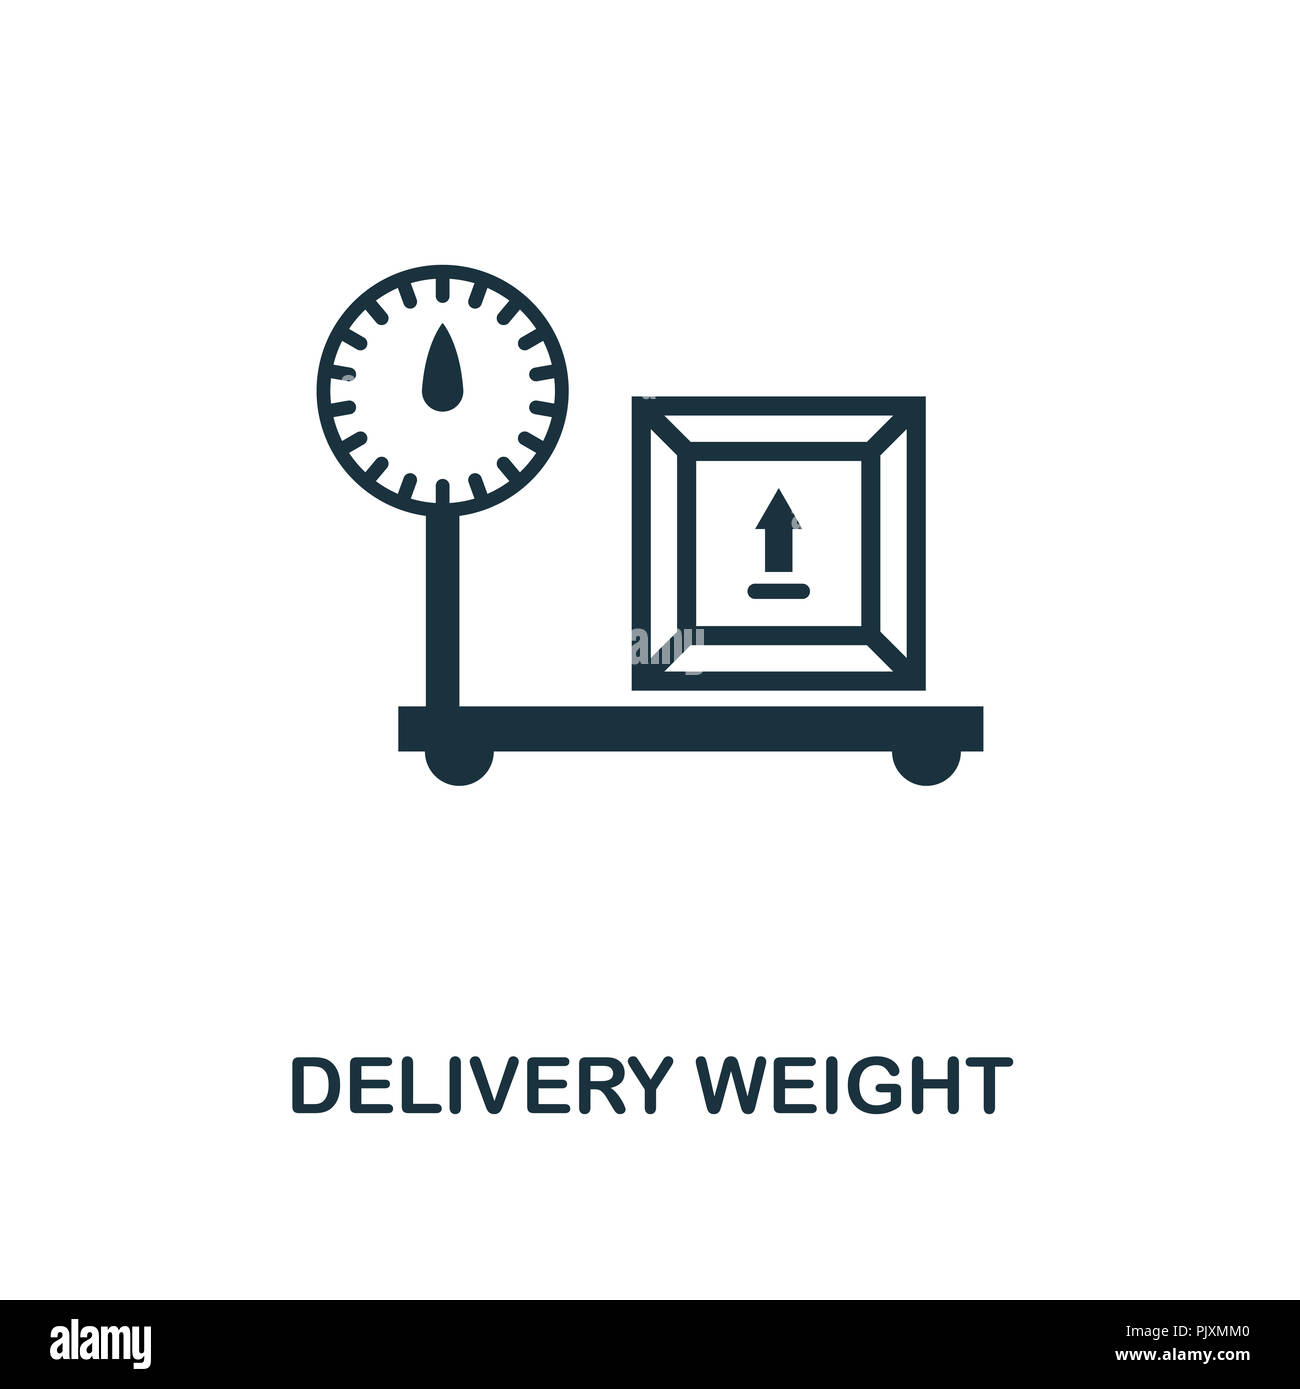 https://c8.alamy.com/comp/PJXMM0/delivery-weight-icon-monochrome-style-design-from-logistics-delivery-collection-ui-pixel-perfect-simple-pictogram-delivery-weight-icon-web-design-PJXMM0.jpg